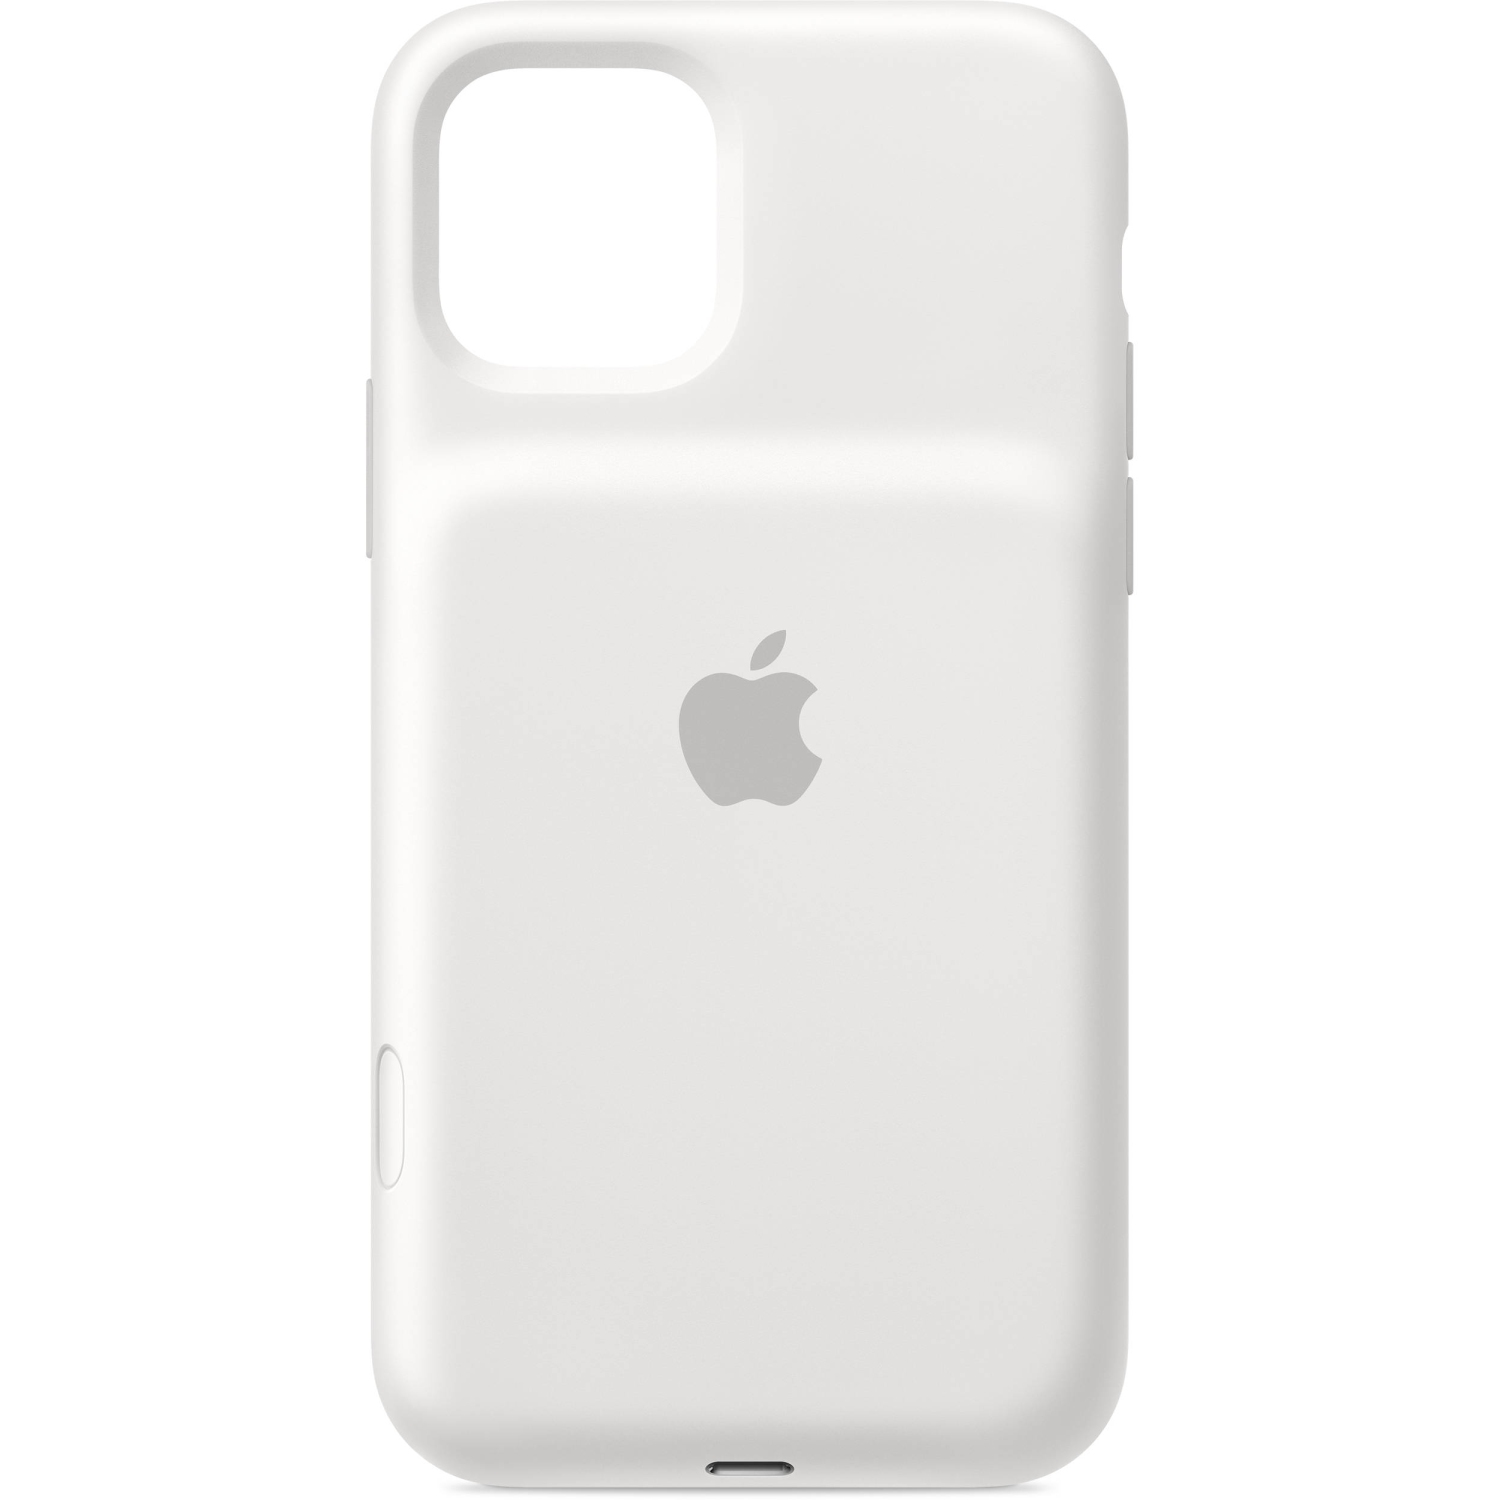 Apple iPhone 11 Smart Battery Case with Wireless Charging - White